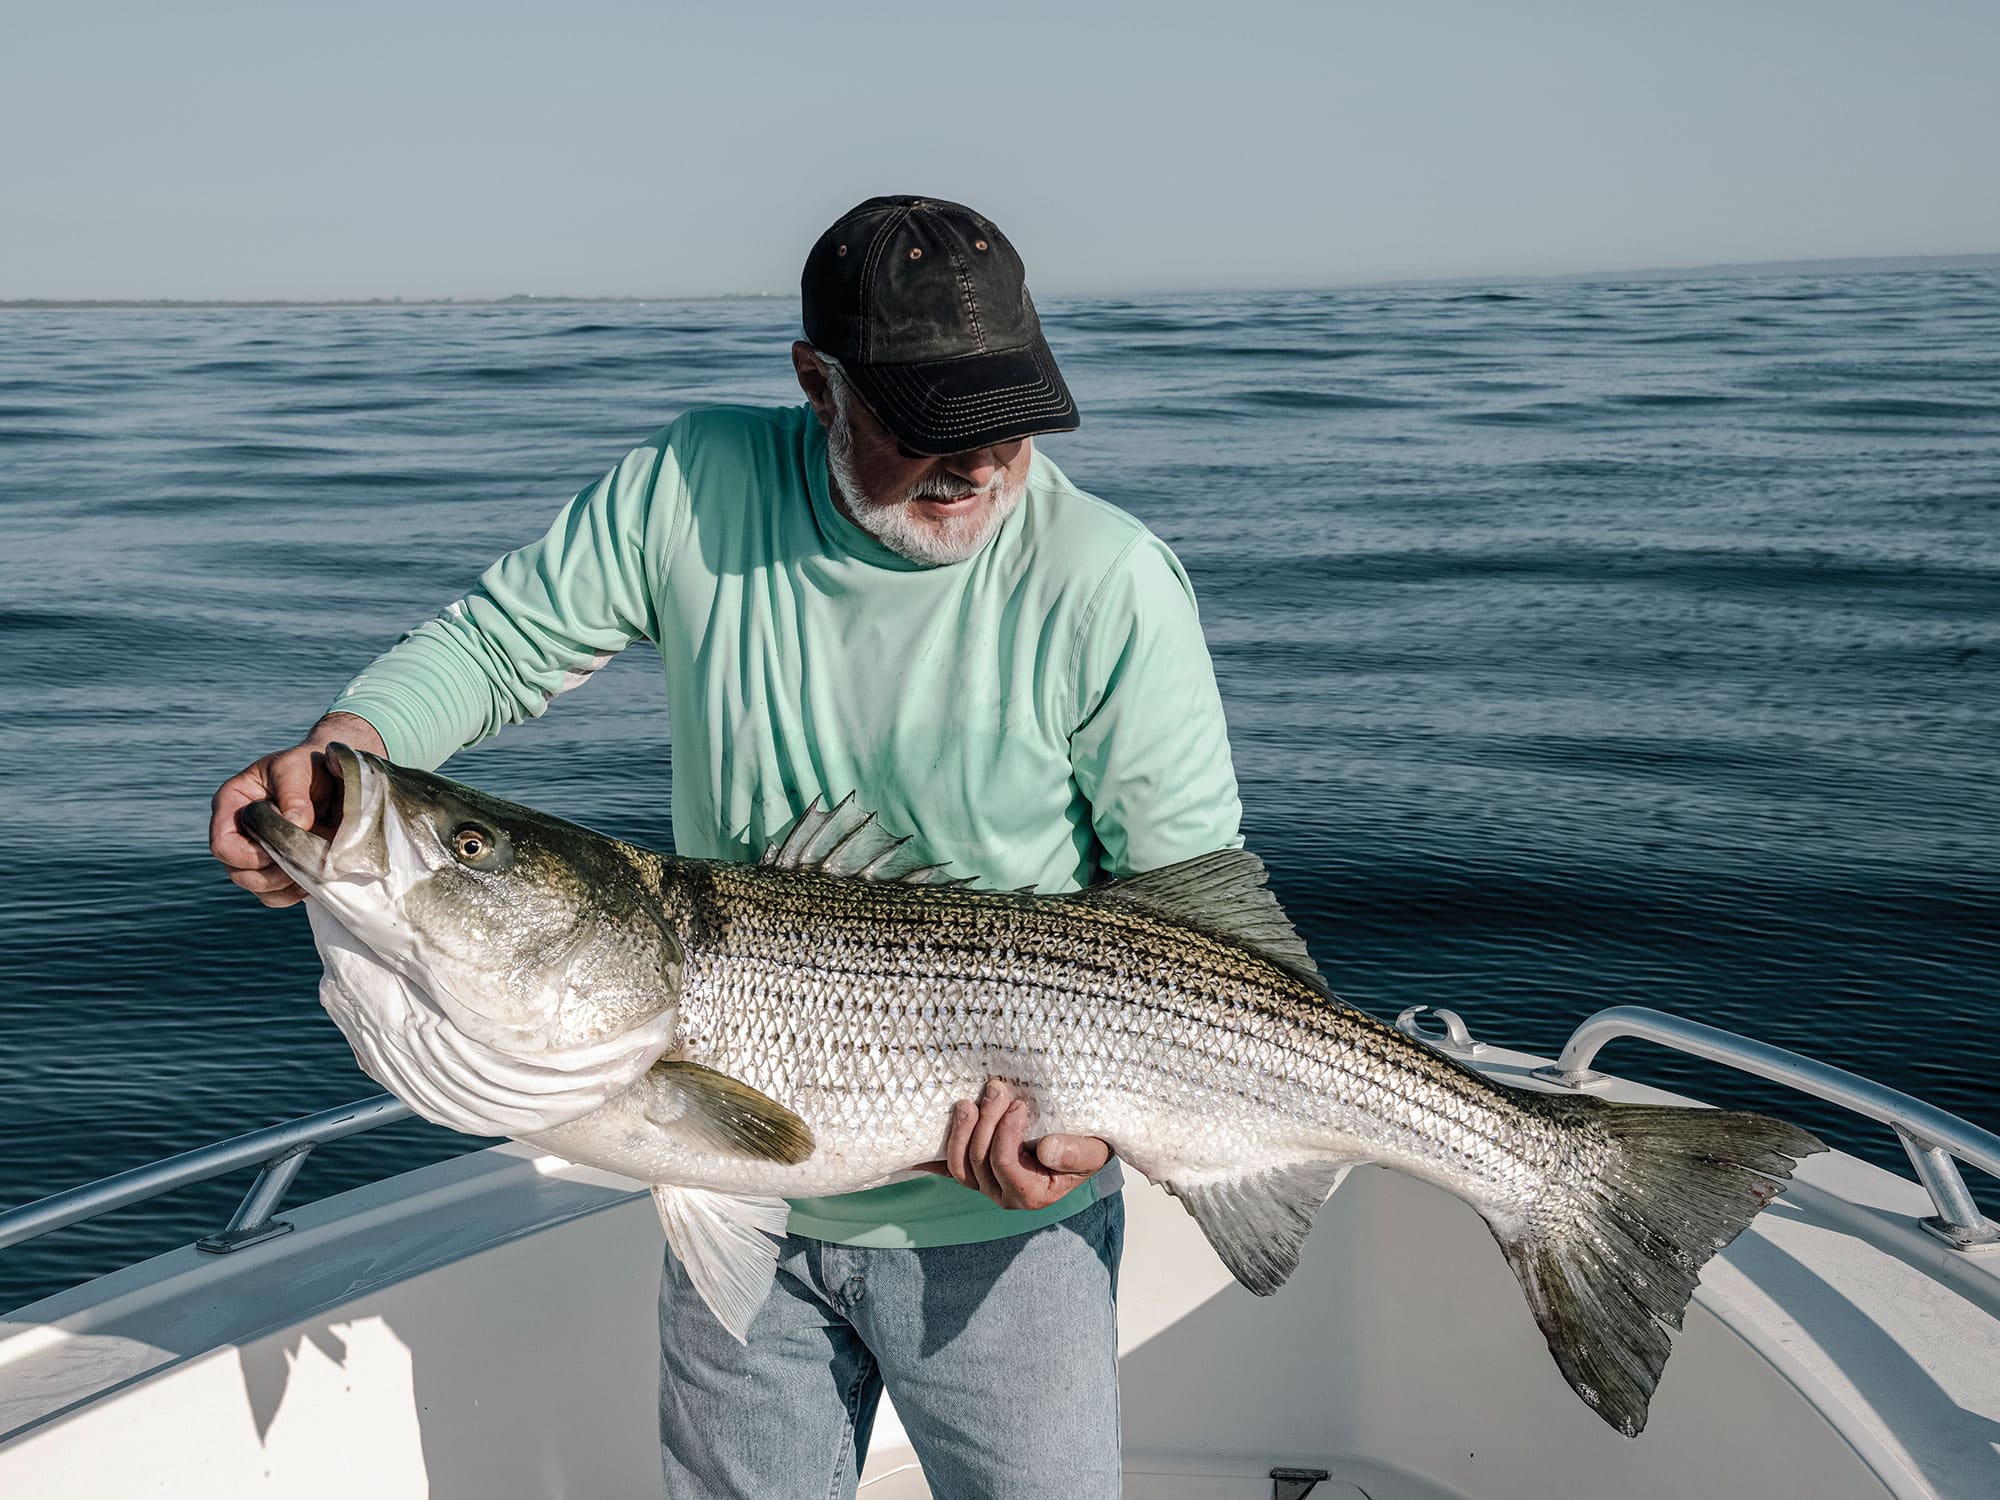 Spoons or Mojos? The “Big Game” Striper Combo - The Fisherman